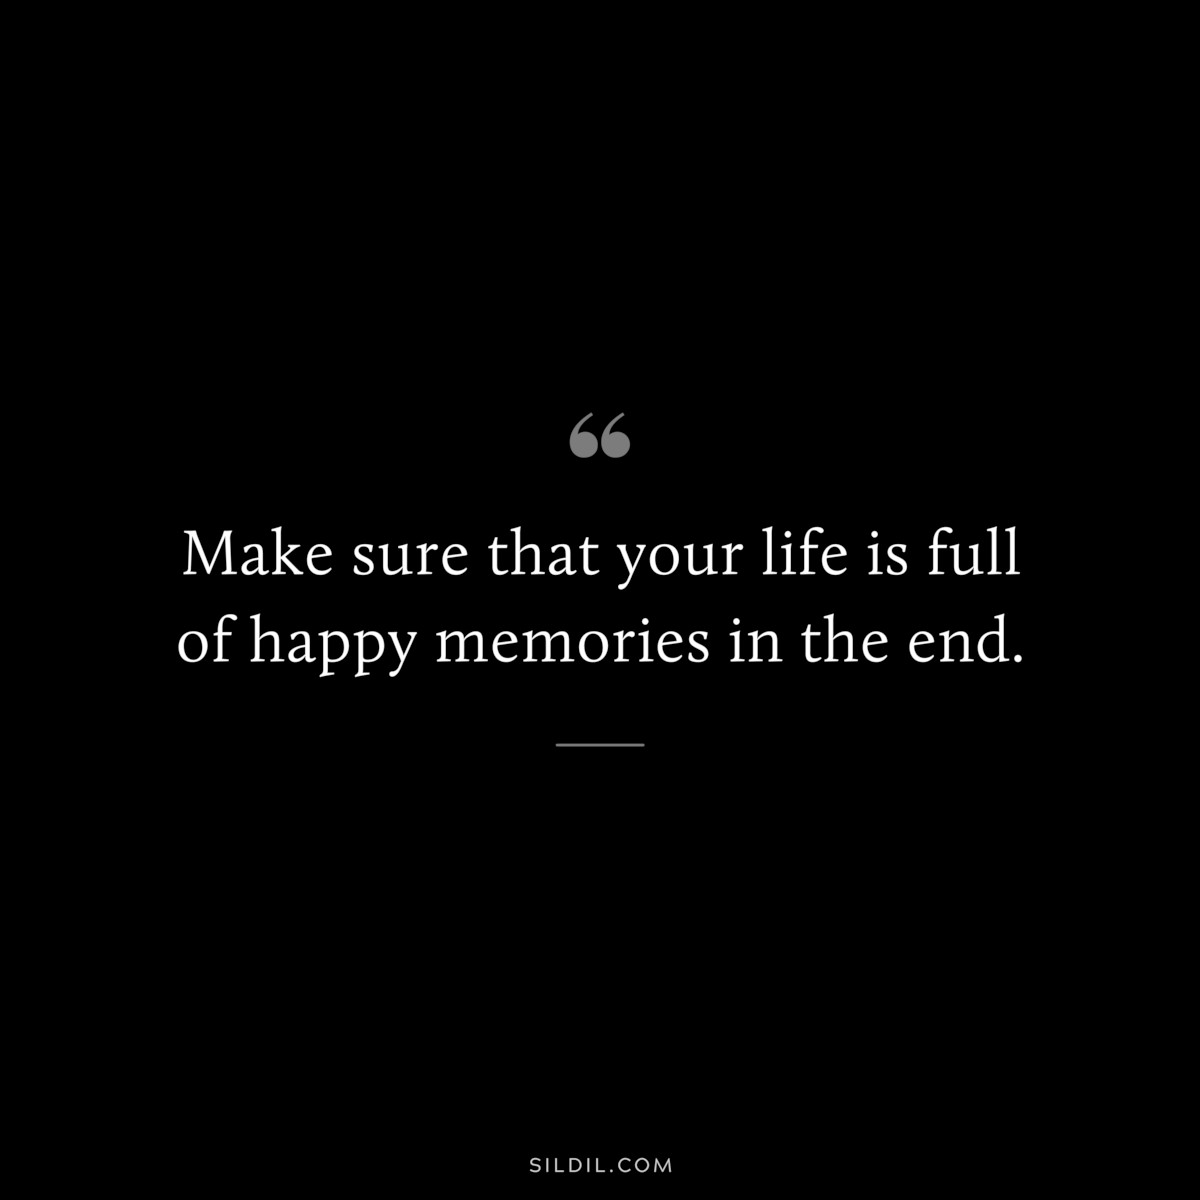 Make sure that your life is full of happy memories in the end.